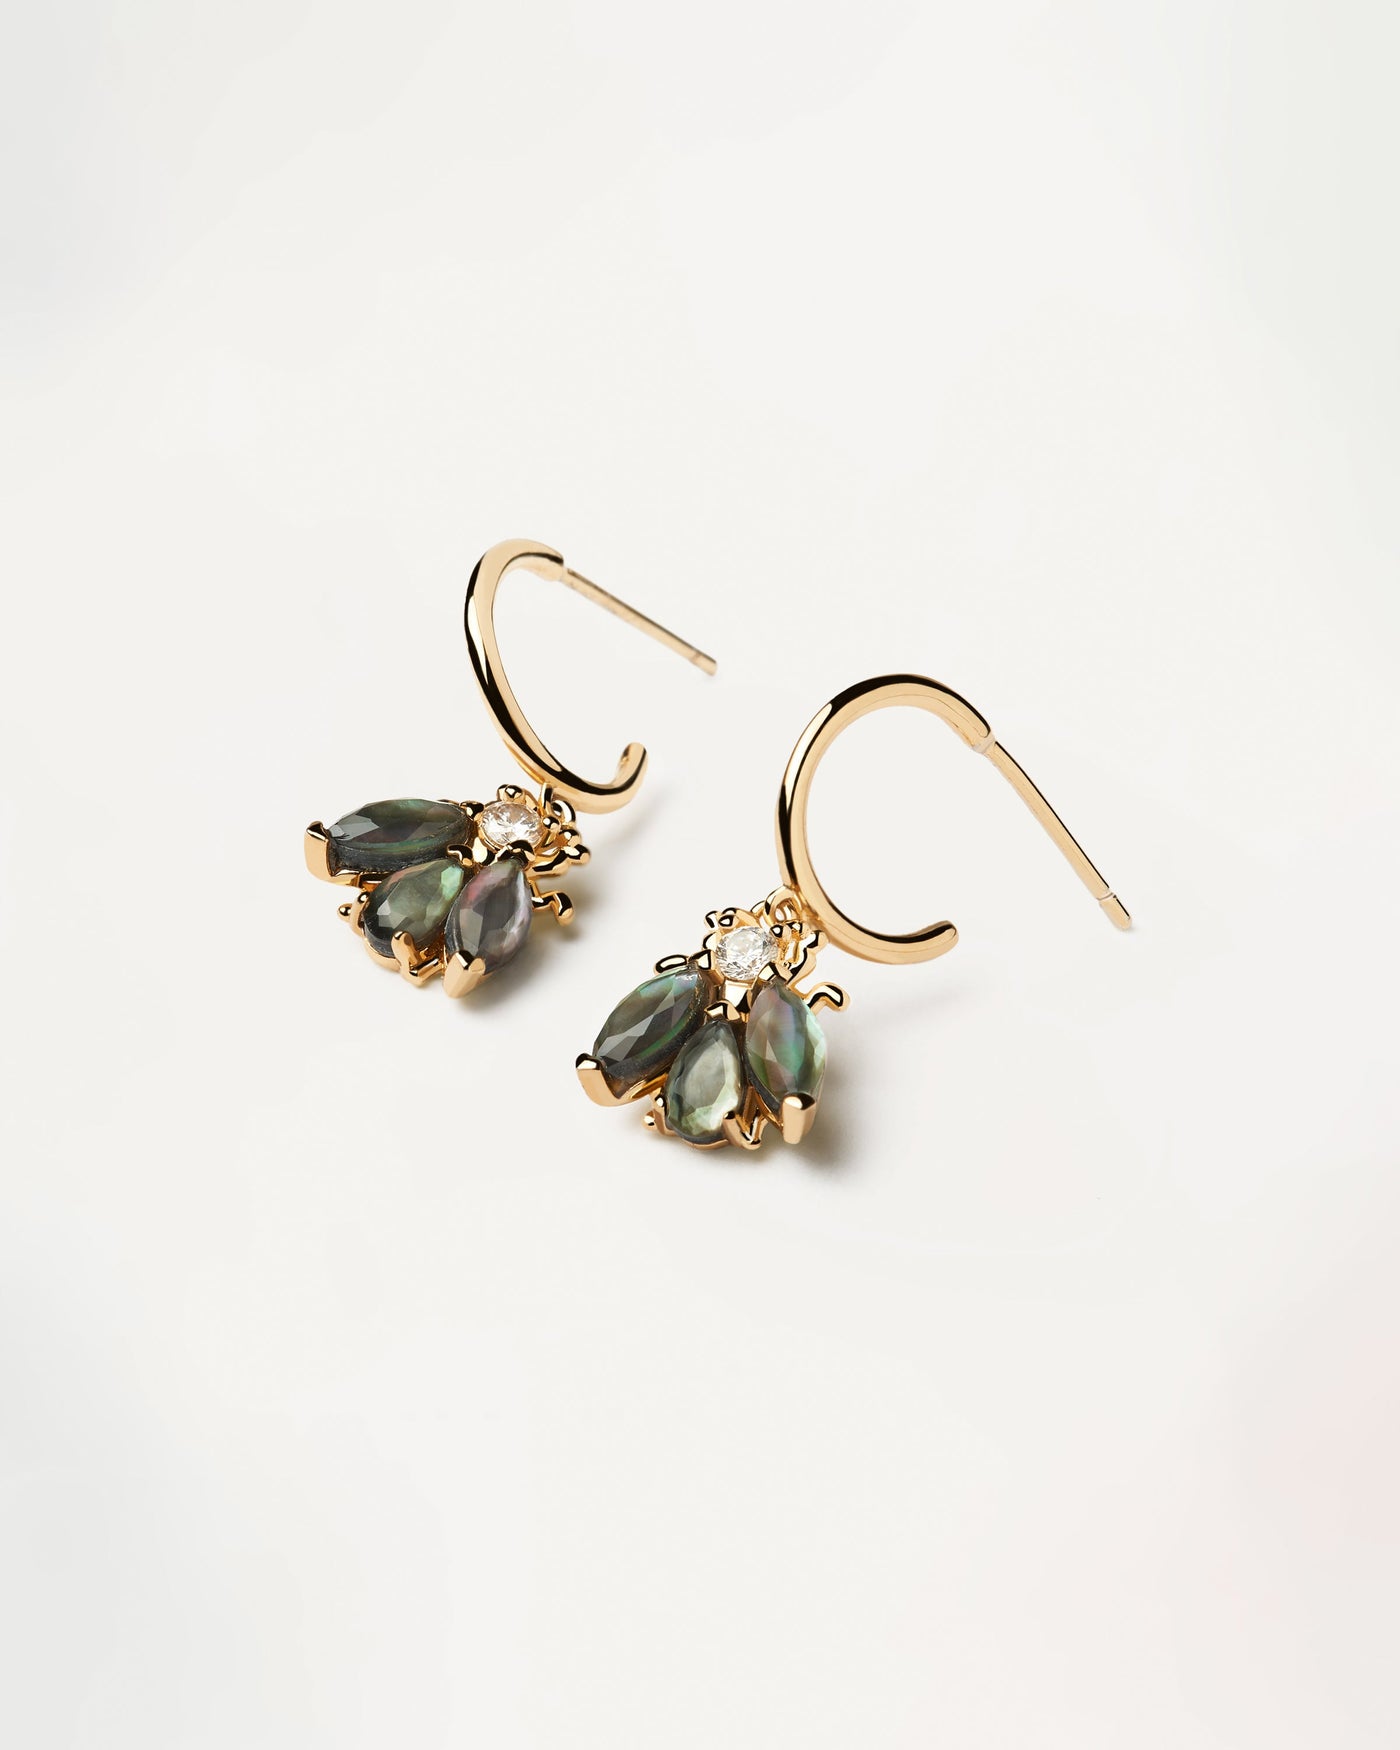 2022 Selection | Zaza Gold Earrings. Get the latest arrival from PDPAOLA. Place your order safely and get this Best Seller. Free Shipping over 40€